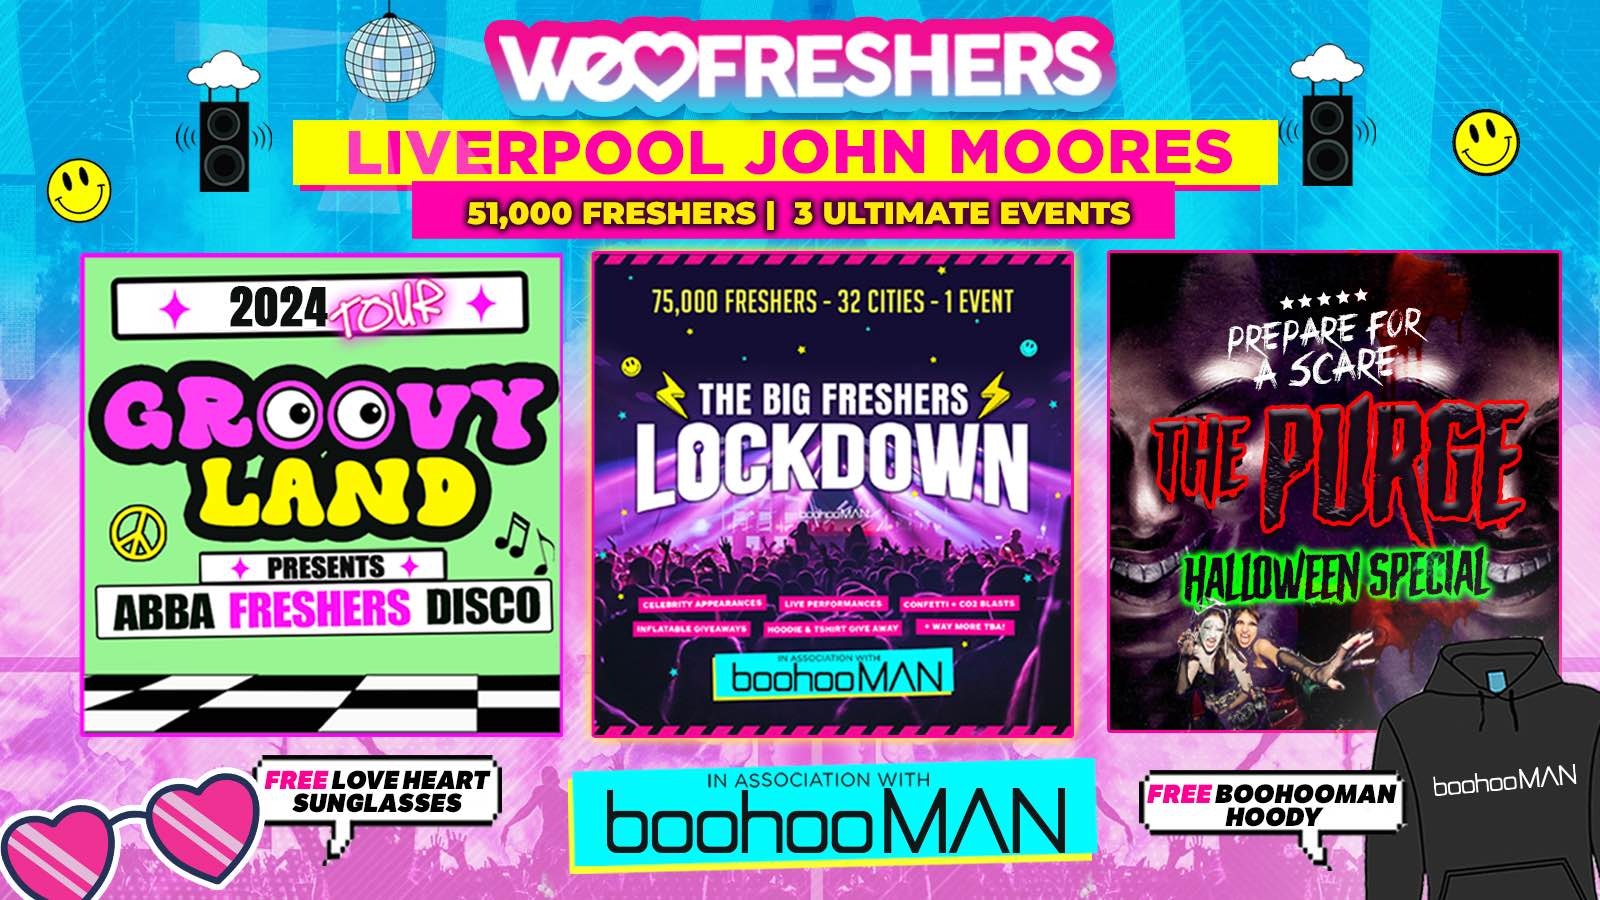 WE LOVE LIVERPOOL JOHN MOORE FRESHERS 2024 in association with boohooMAN ❗FREE BOOHOOMAN HOODIE TODAY ONLY❗